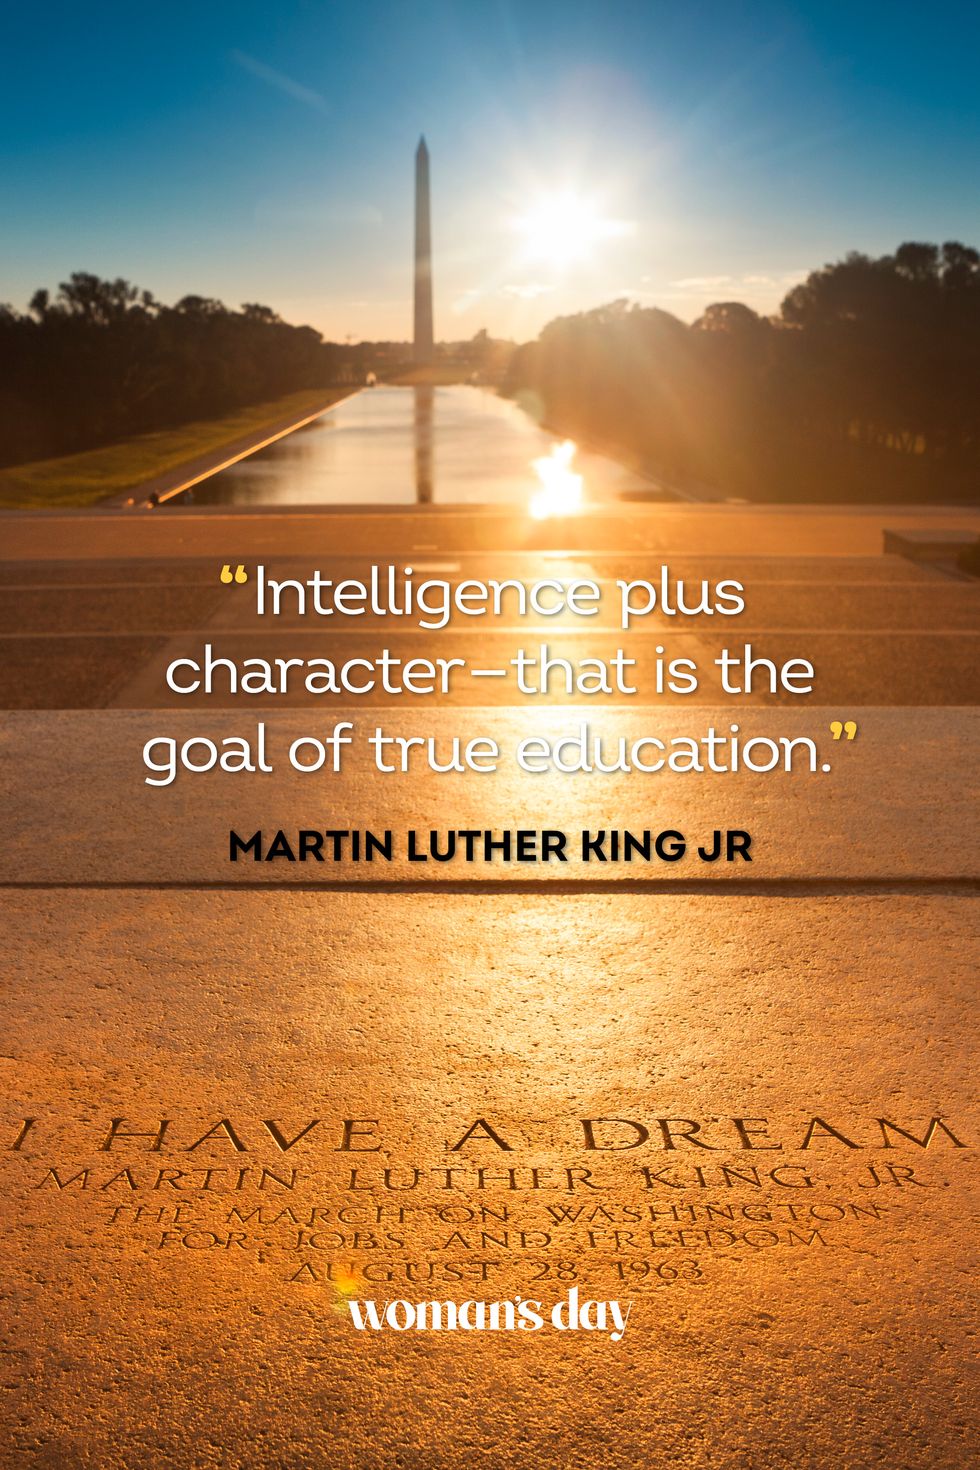 12 of the Most Inspiring Martin Luther King Jr. Quotes